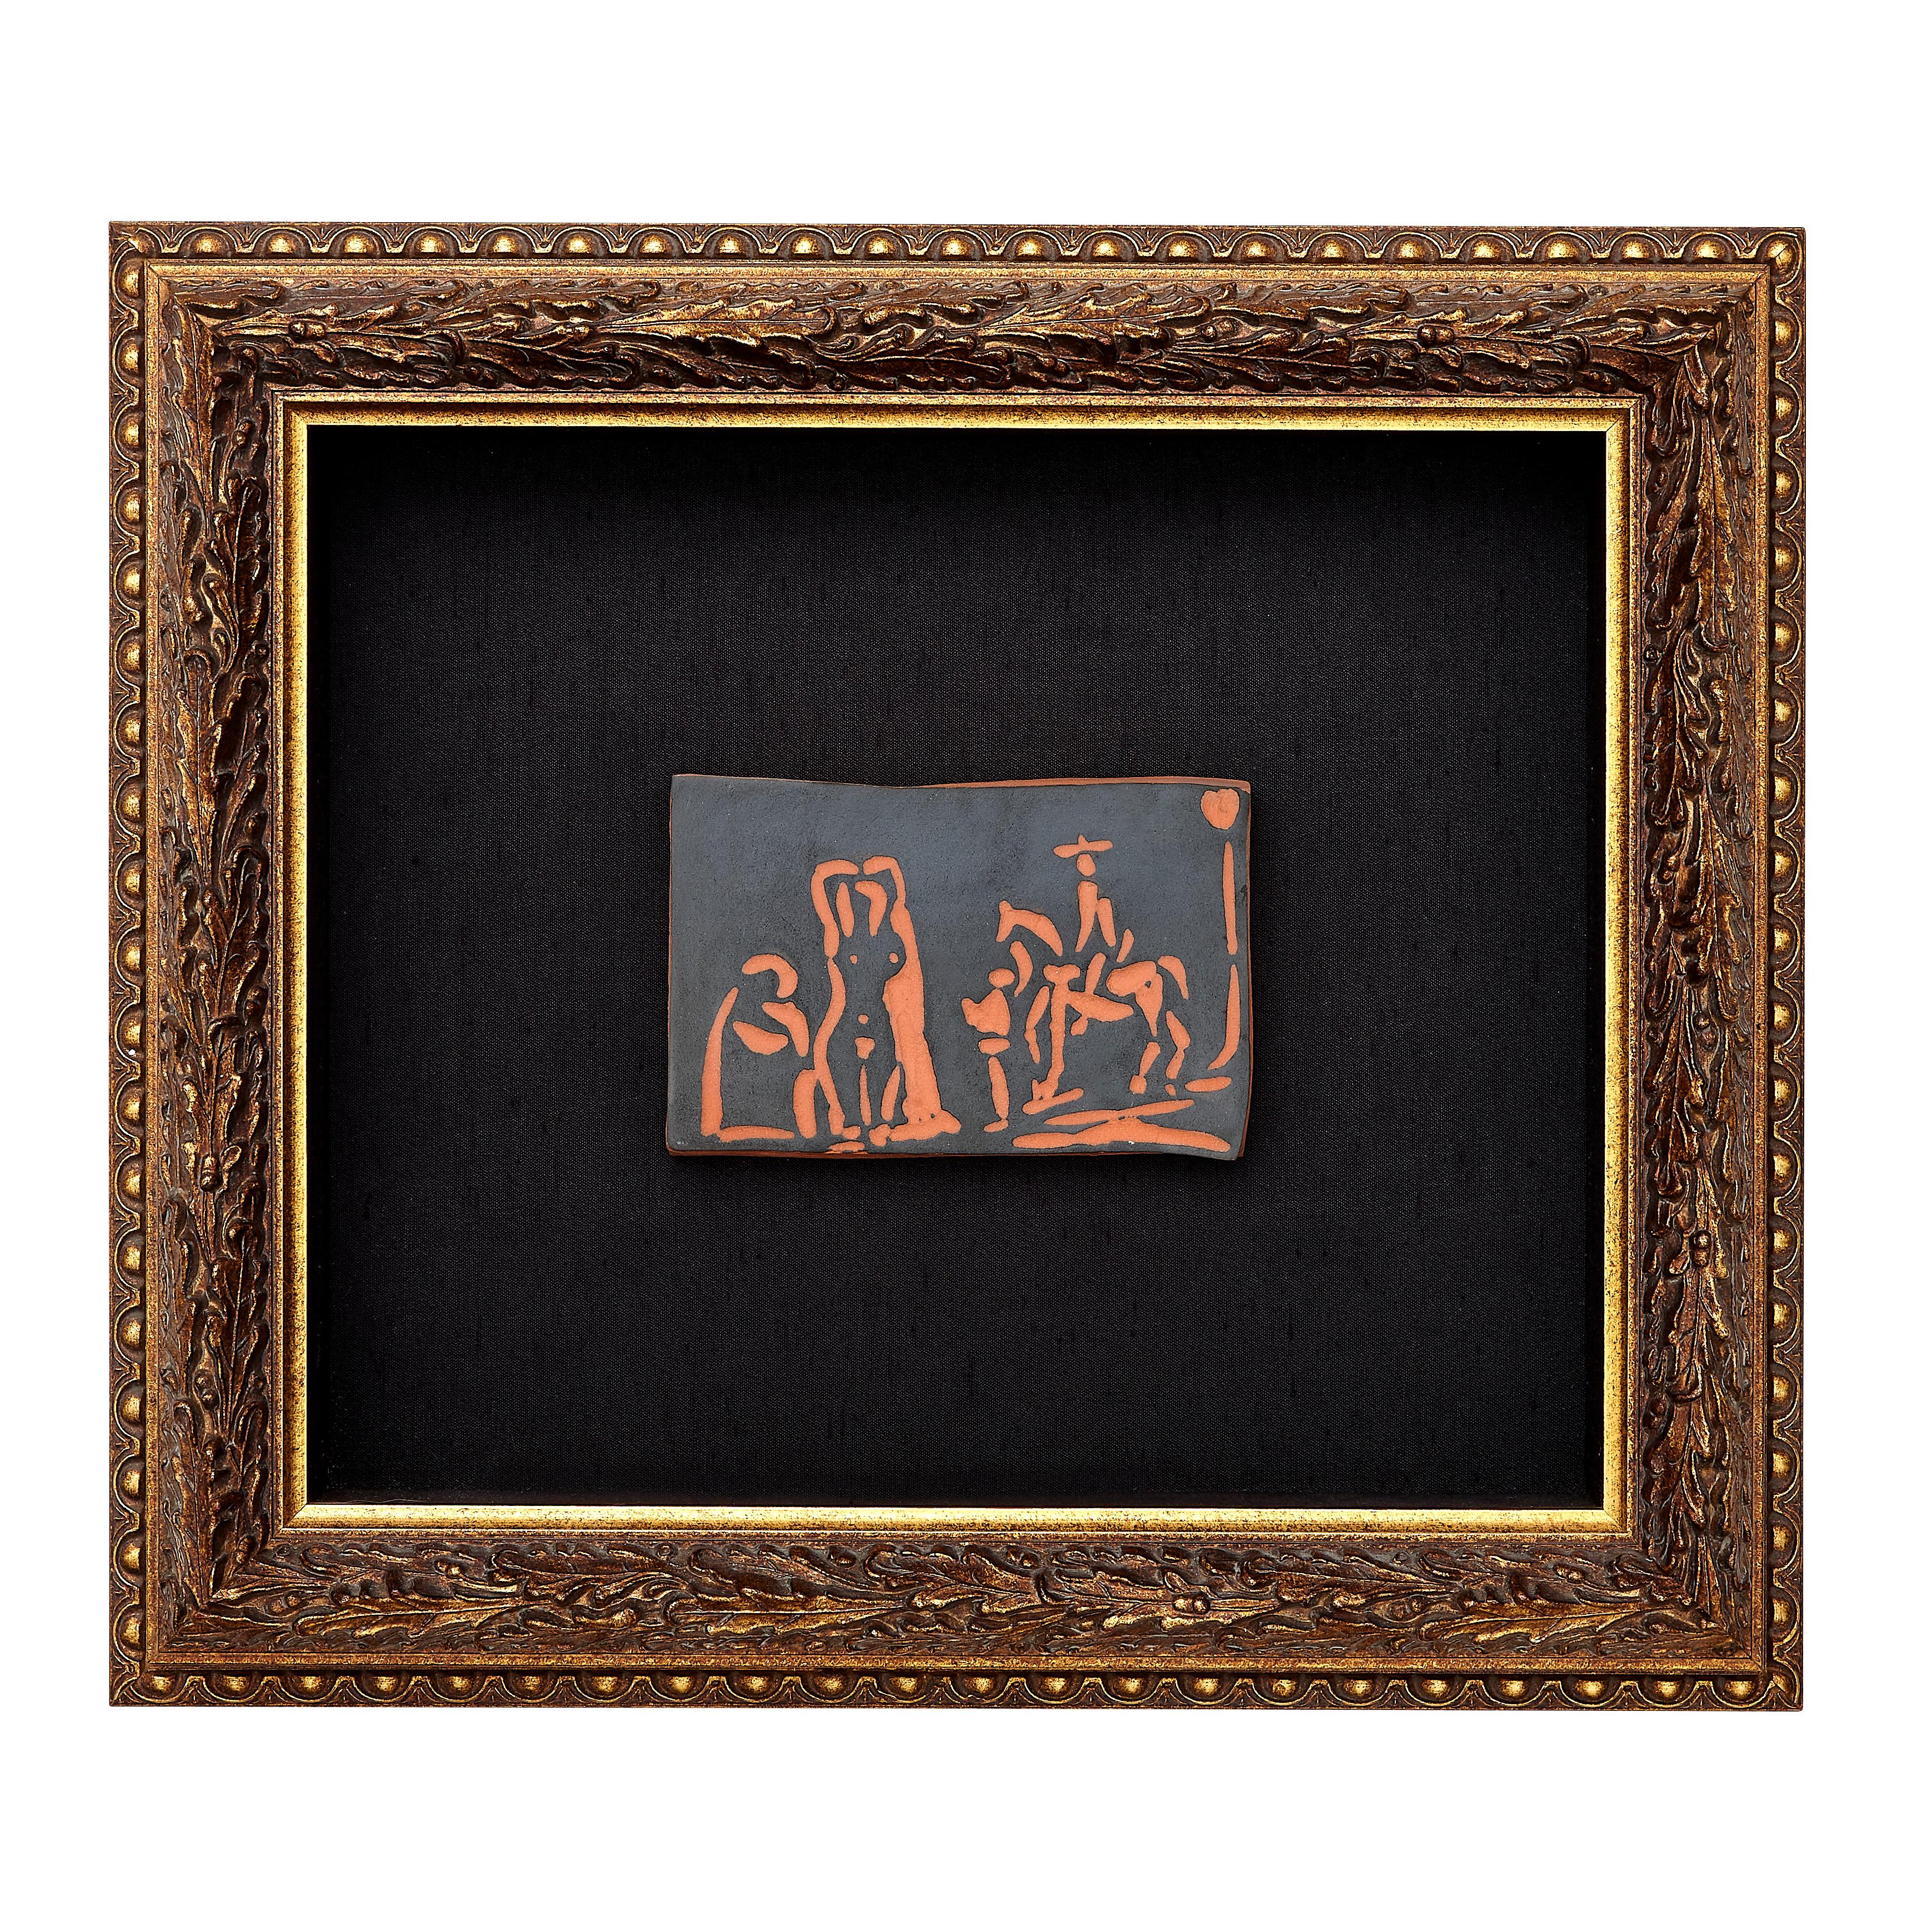 PABLO PICASSO (1881-1973) 
Personnages et cavalier' (A. R. 540) 

Terre de faïence plaque, 1968, numbered 178/500, with the workshop numbering, partially painted, with the Empreinte Originale de Picasso and Madoura stamps.